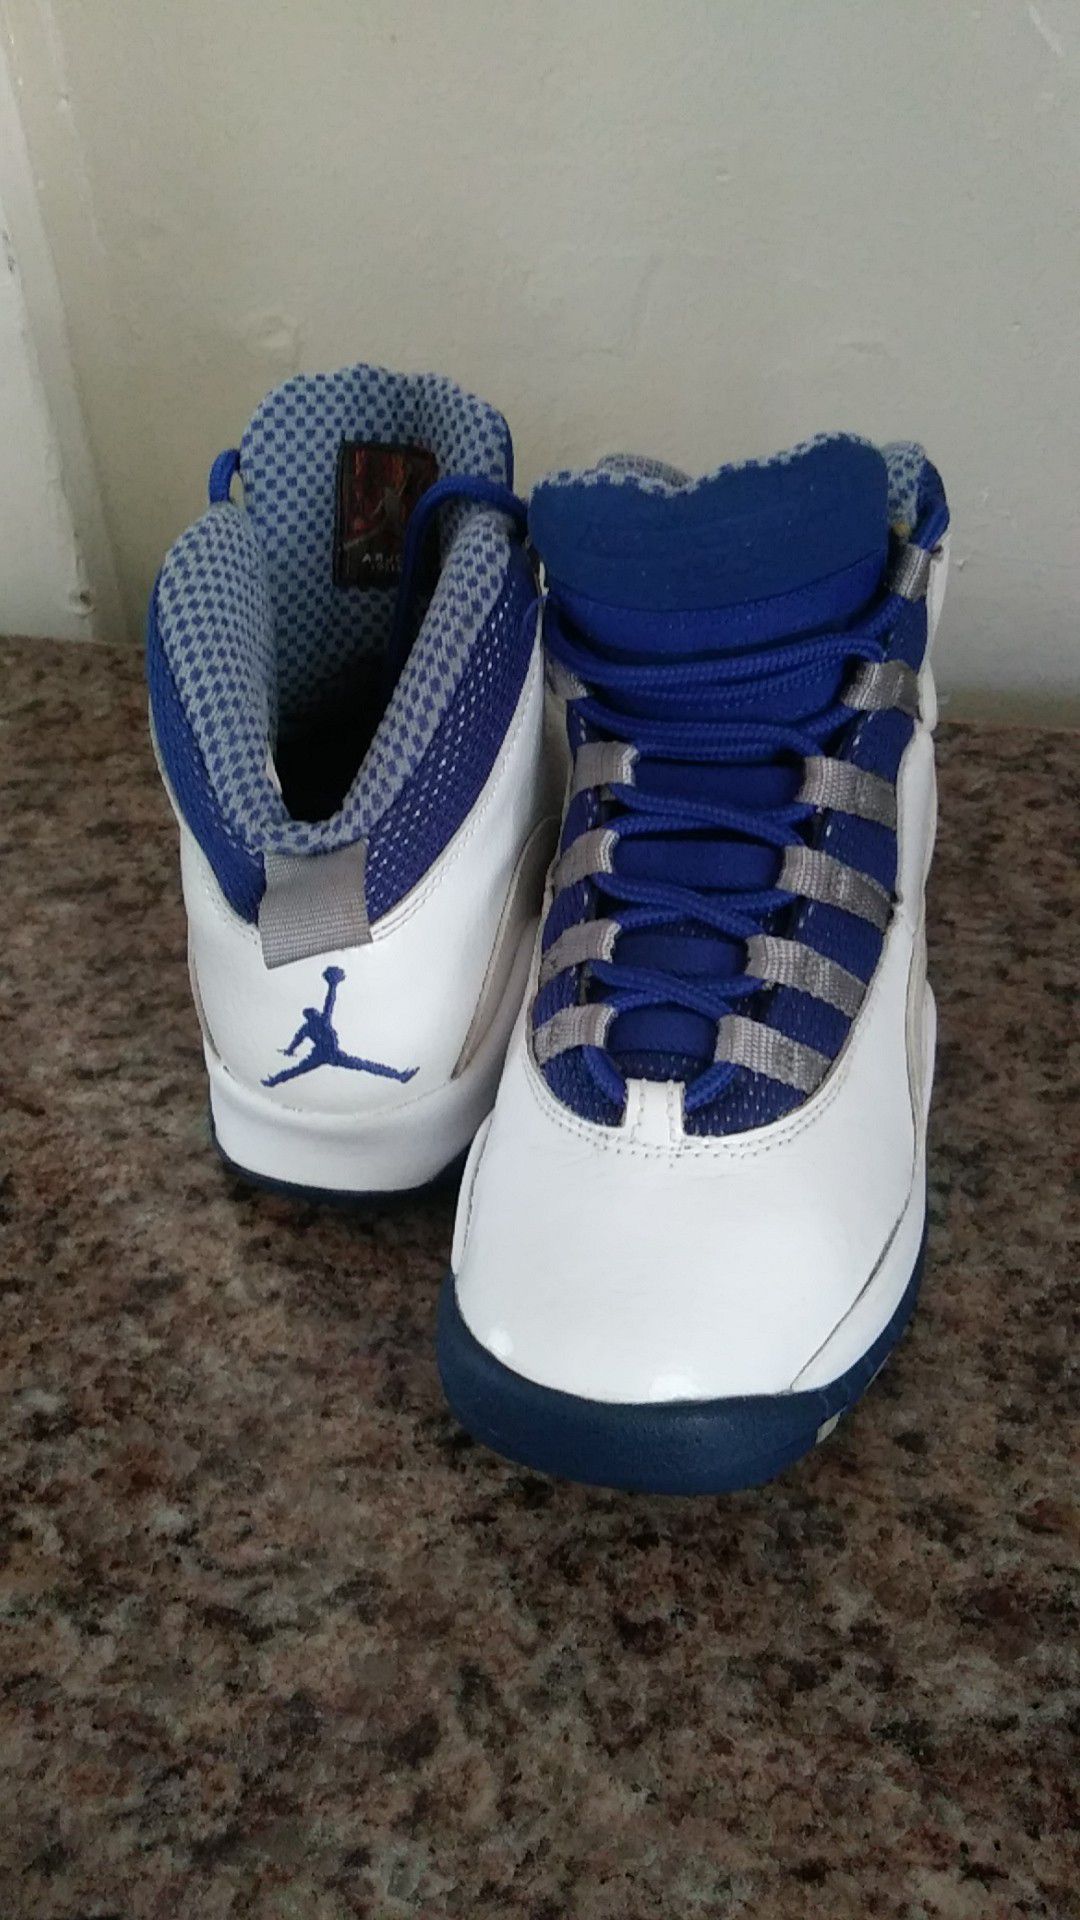 Kids blue and white Air Jordans kids size boys 4 YOUTH